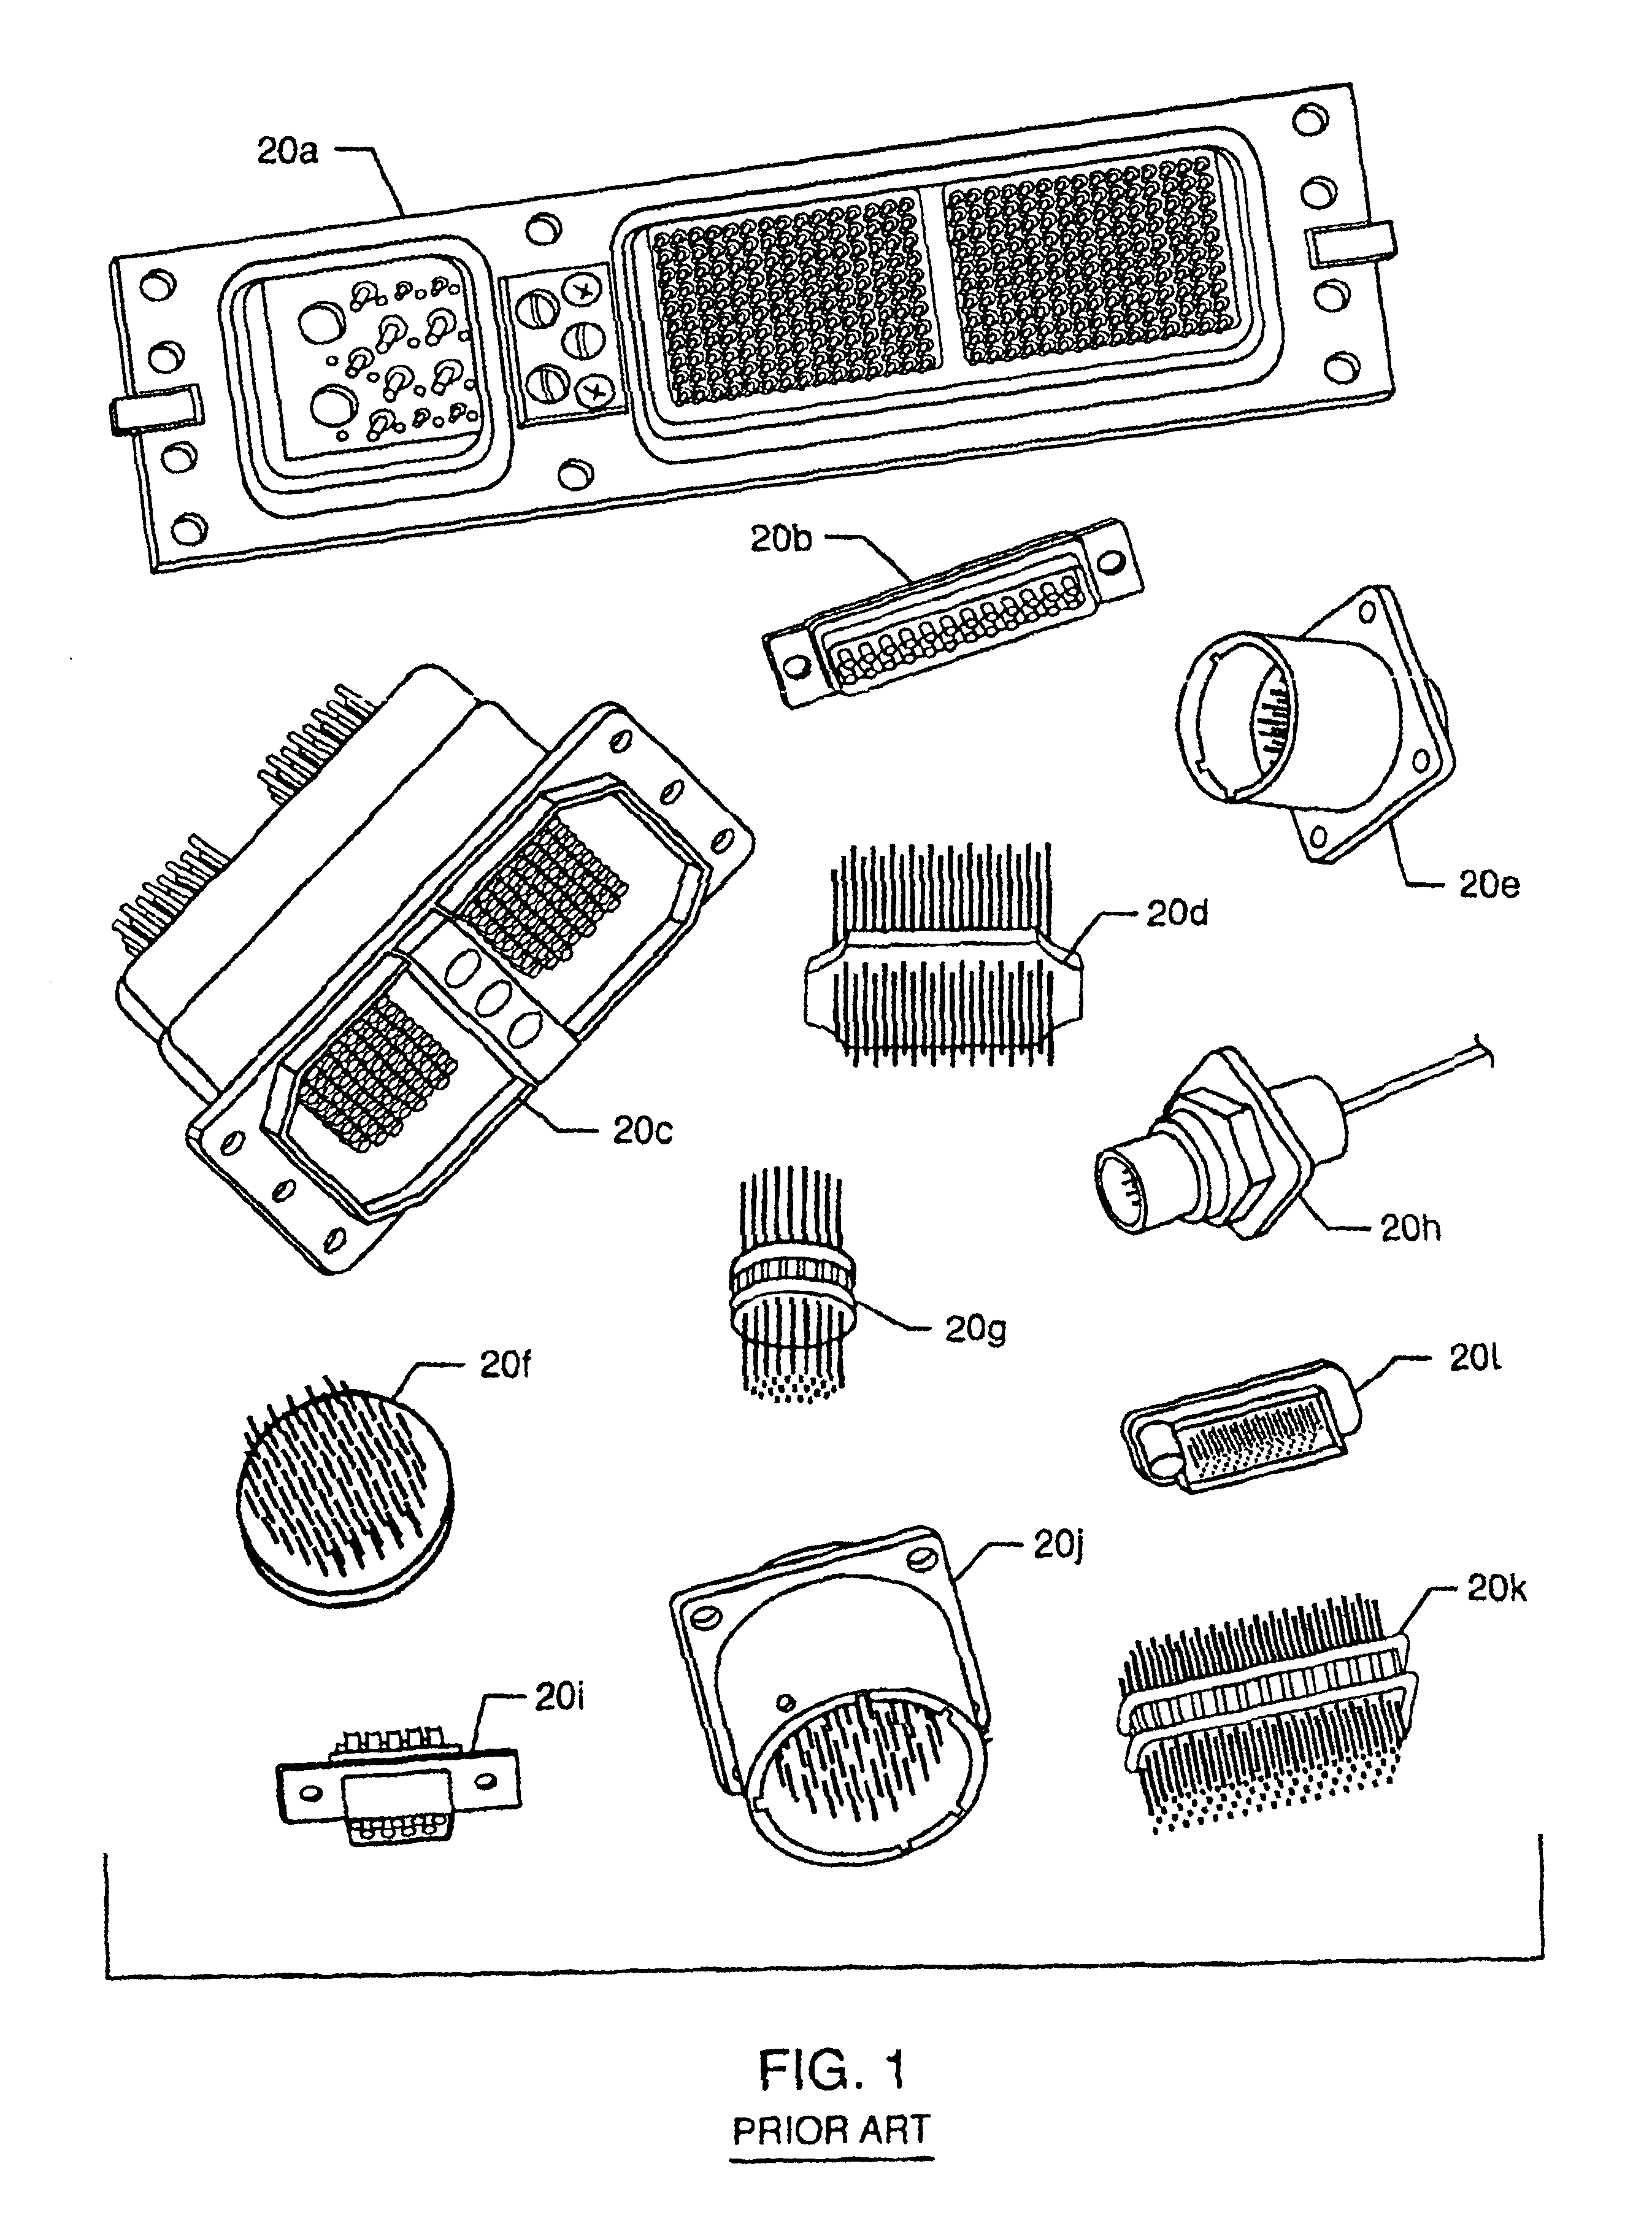 EMI filtered connectors using internally grounded feedthrough capacitors